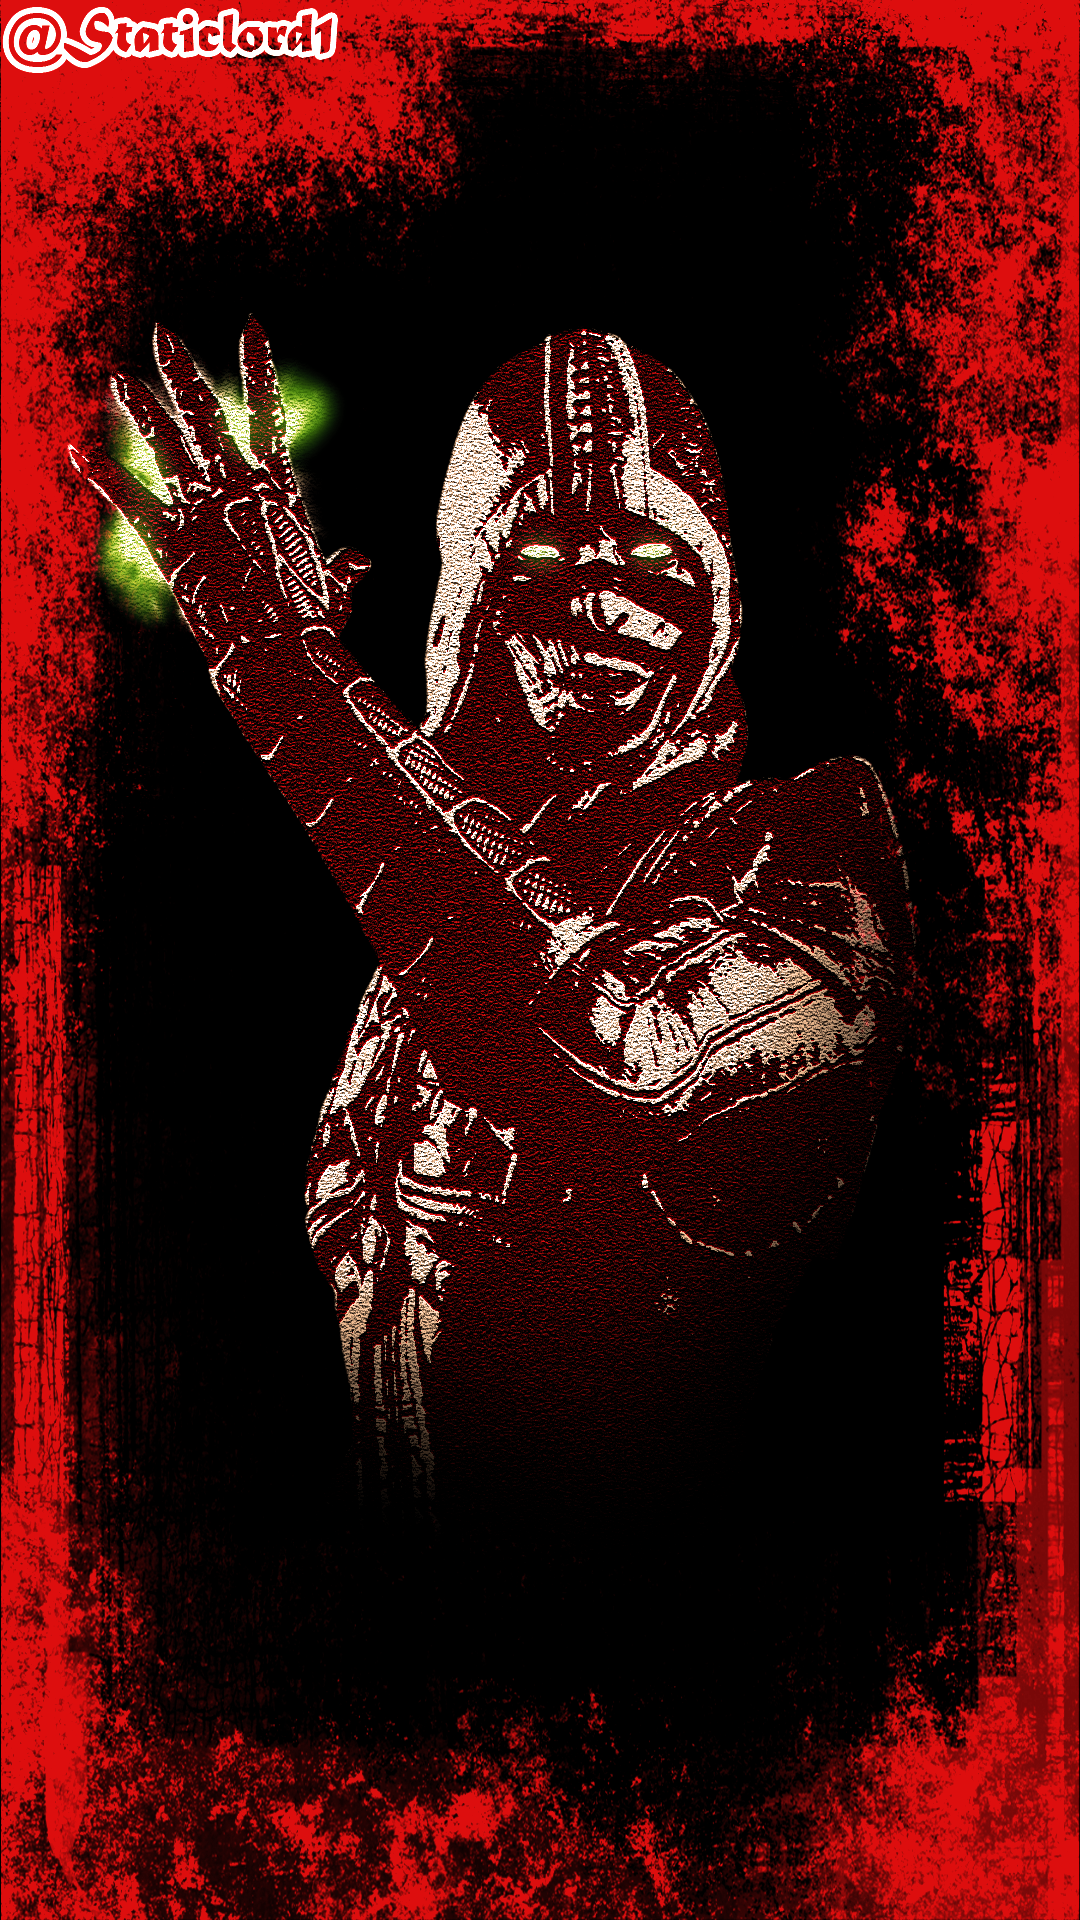 Made An Ermac Wallpaper At School The Other Day Woo, - Illustration , HD Wallpaper & Backgrounds